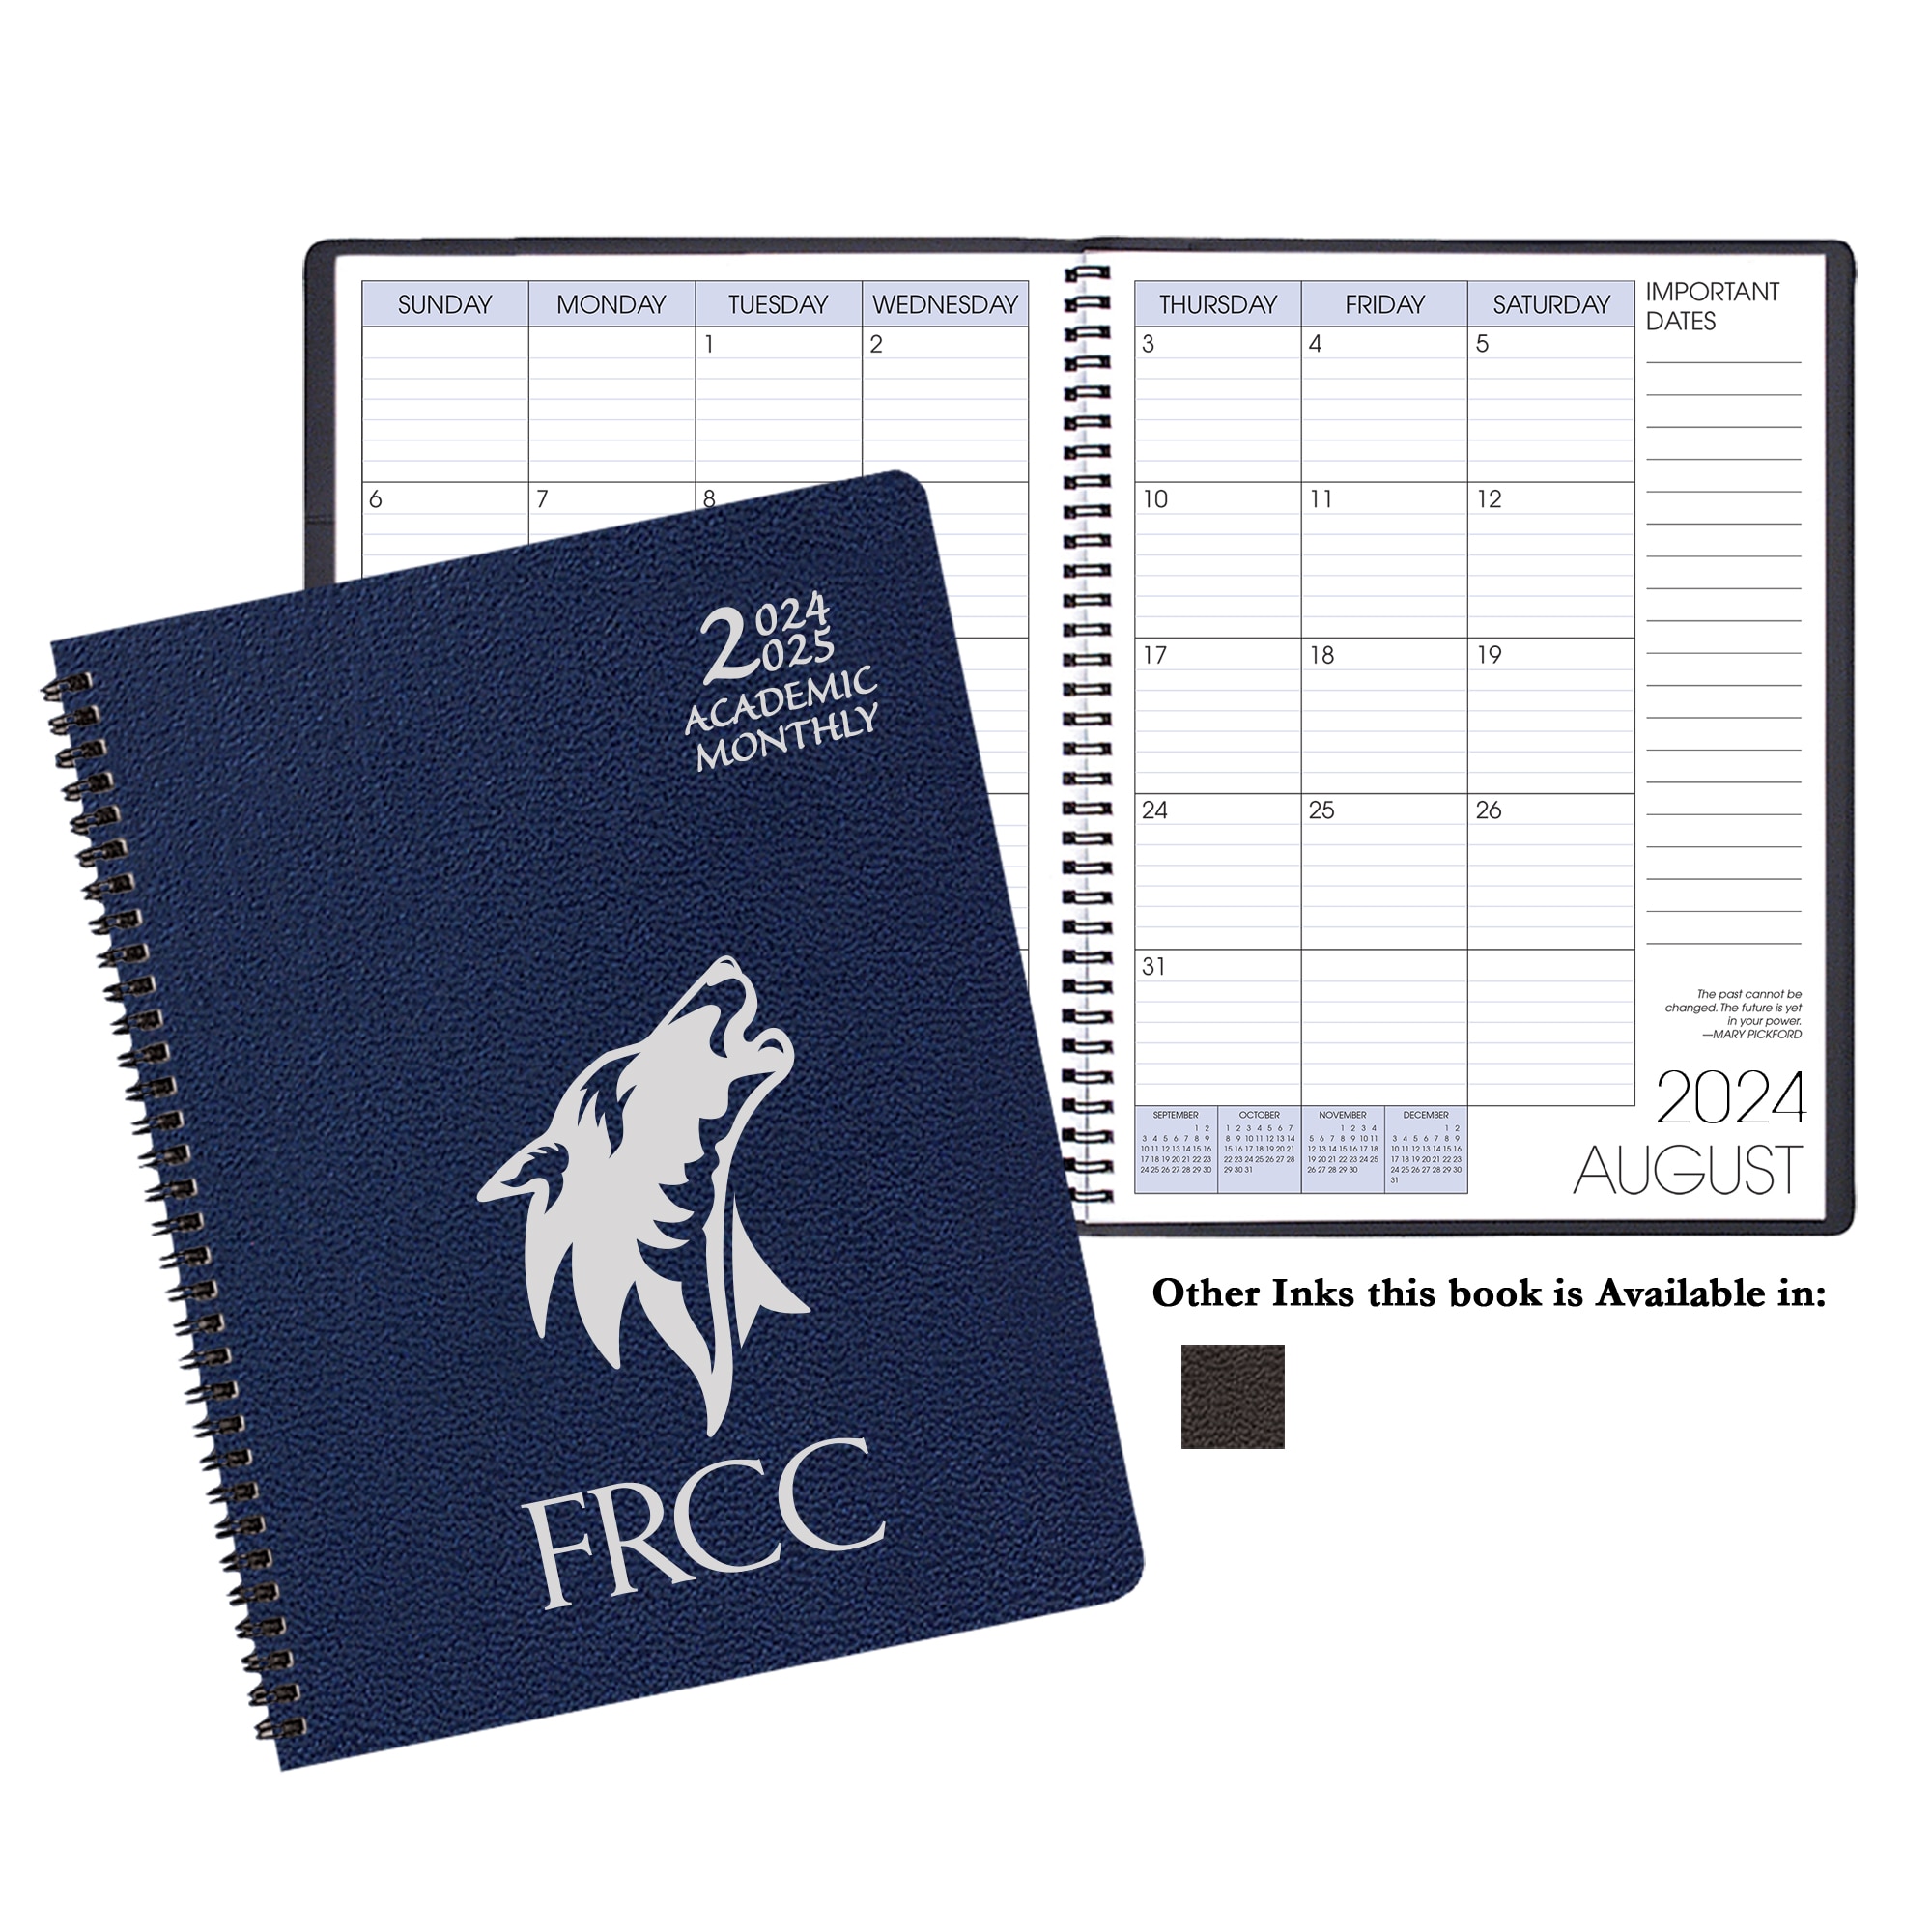 Payne 24-25 Imprinted Academic Monthly Planner  8.5"x11"